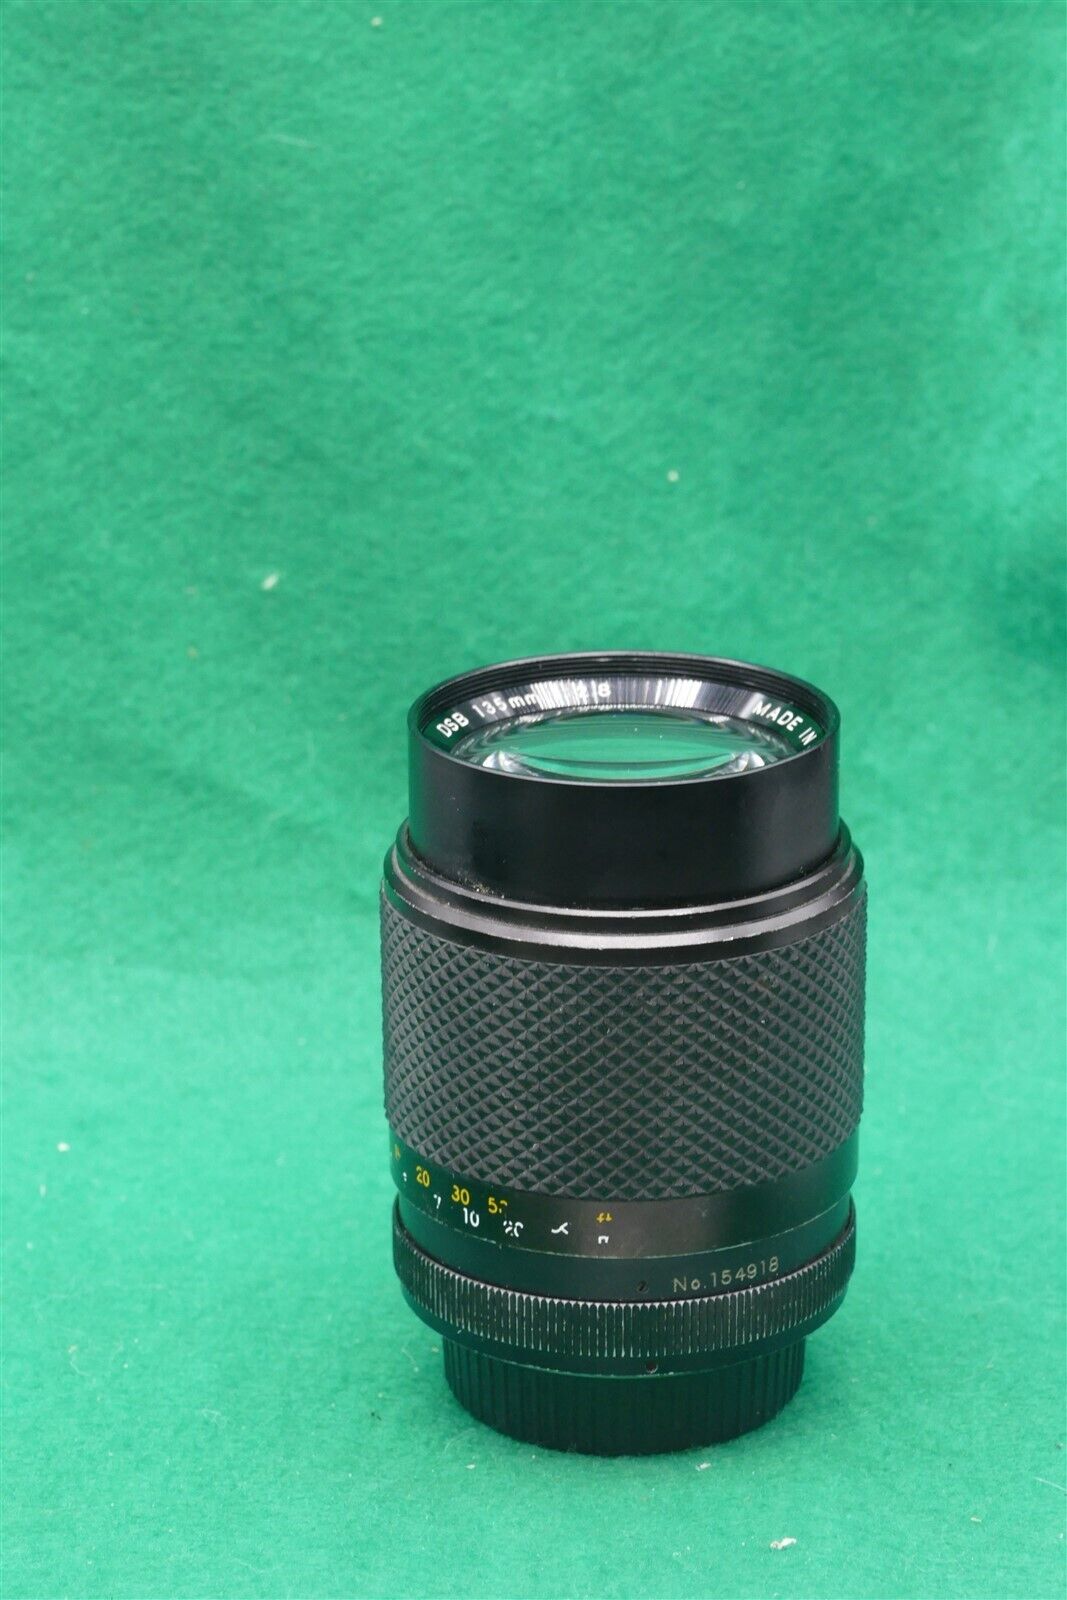 Yashica DSB 135mm f2.8 lens For Contax/ Yashica Mount Manual Focus Cameras